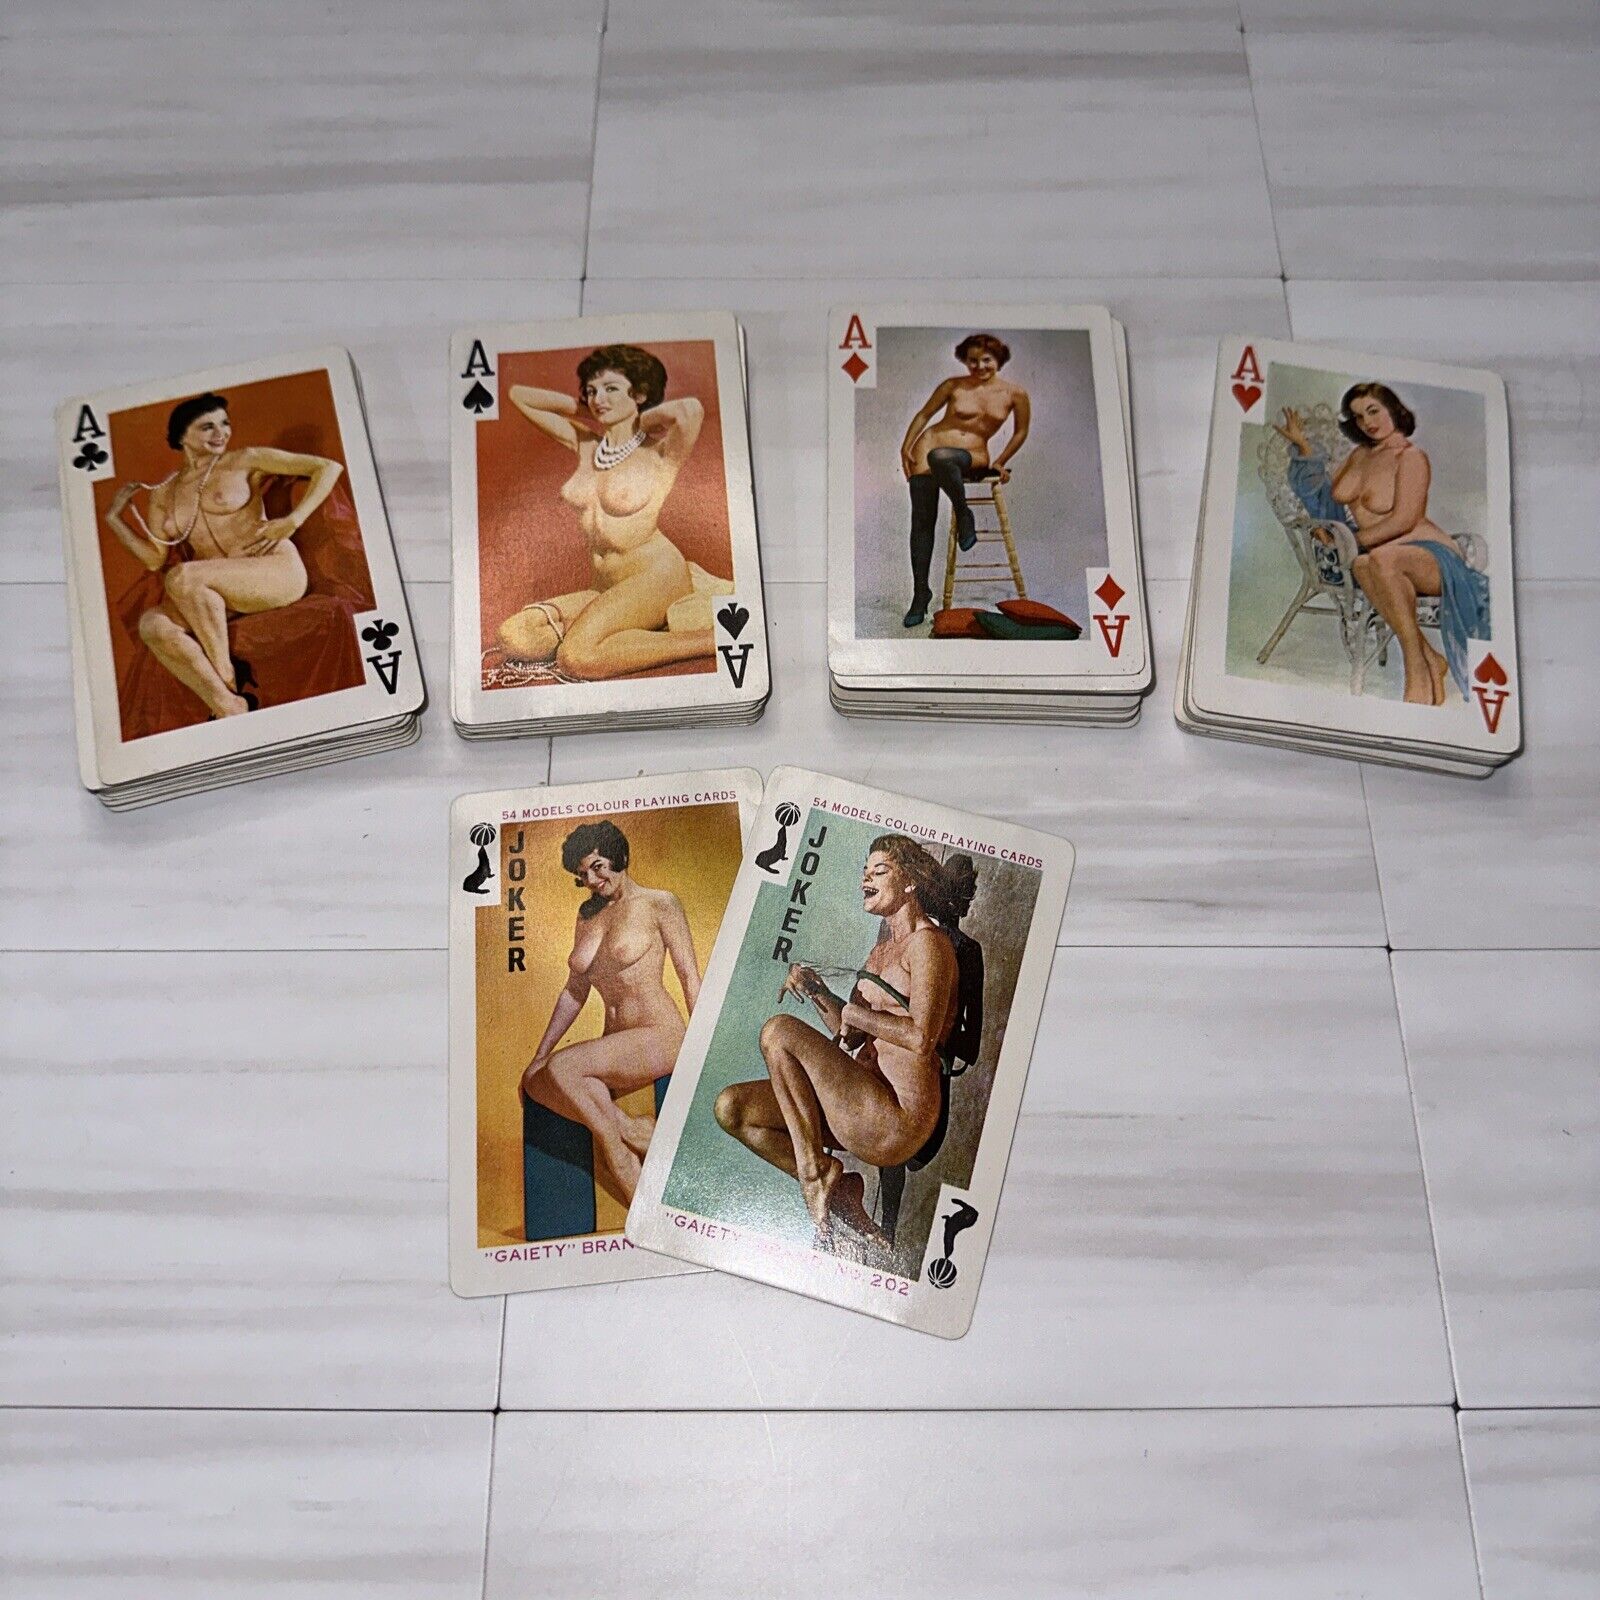 Vintage playing cards nude explicit Erotica Sexual 54cards total no box - Pin Up